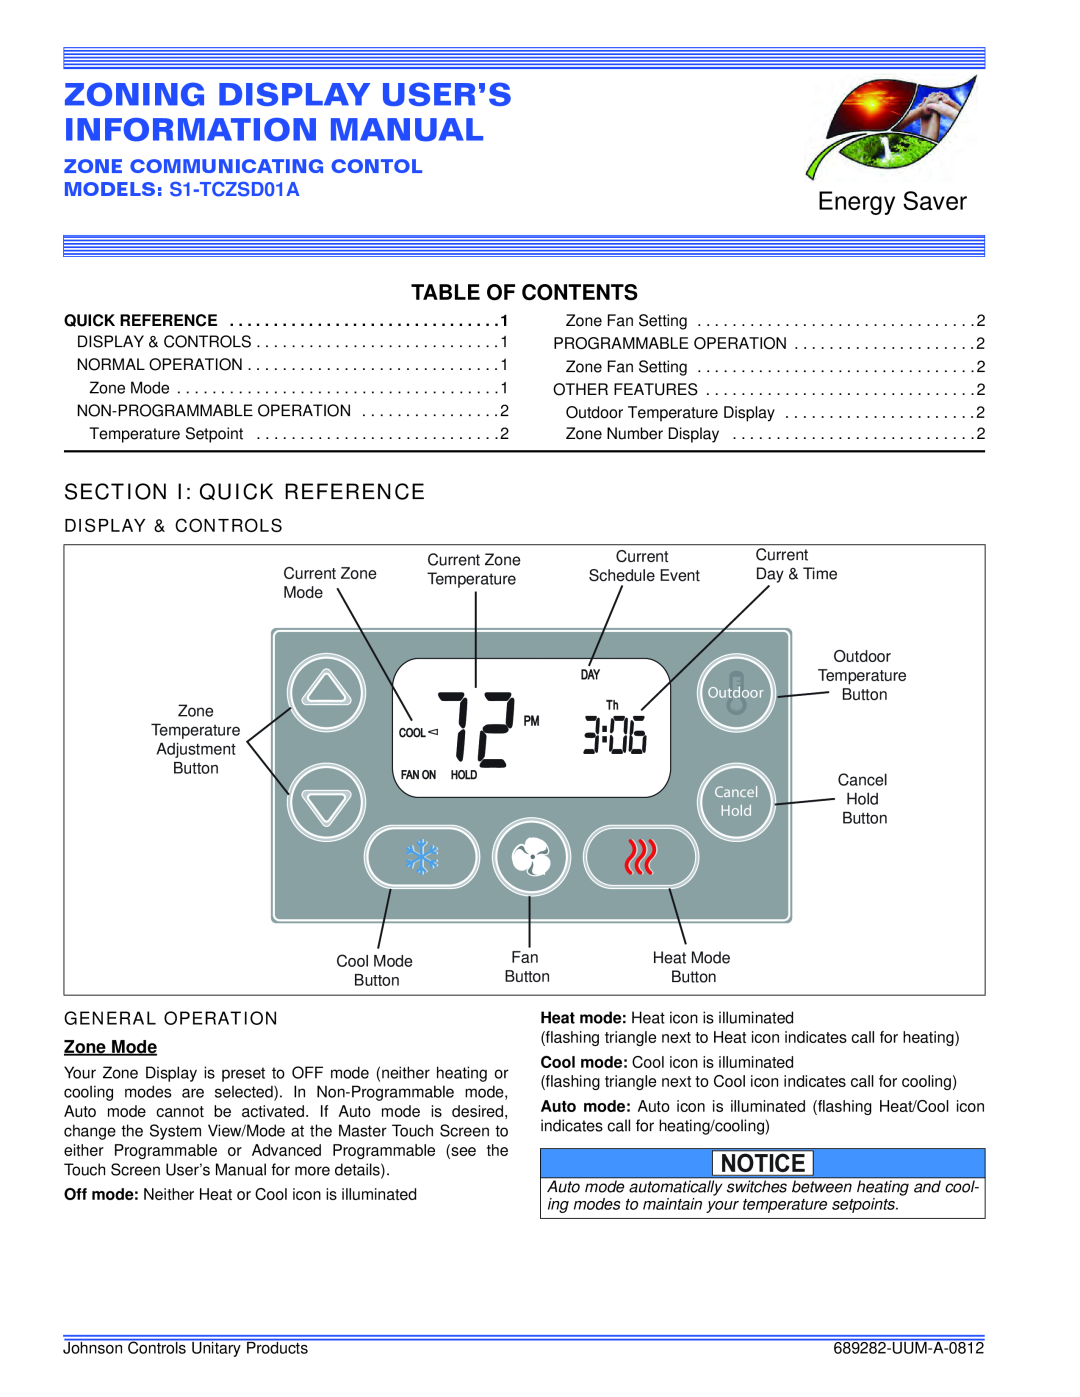 Johnson Controls S1-TCZSD01A user manual Display & Controls, General Operation, Zone Mode, Quick Reference, Energy Saver 